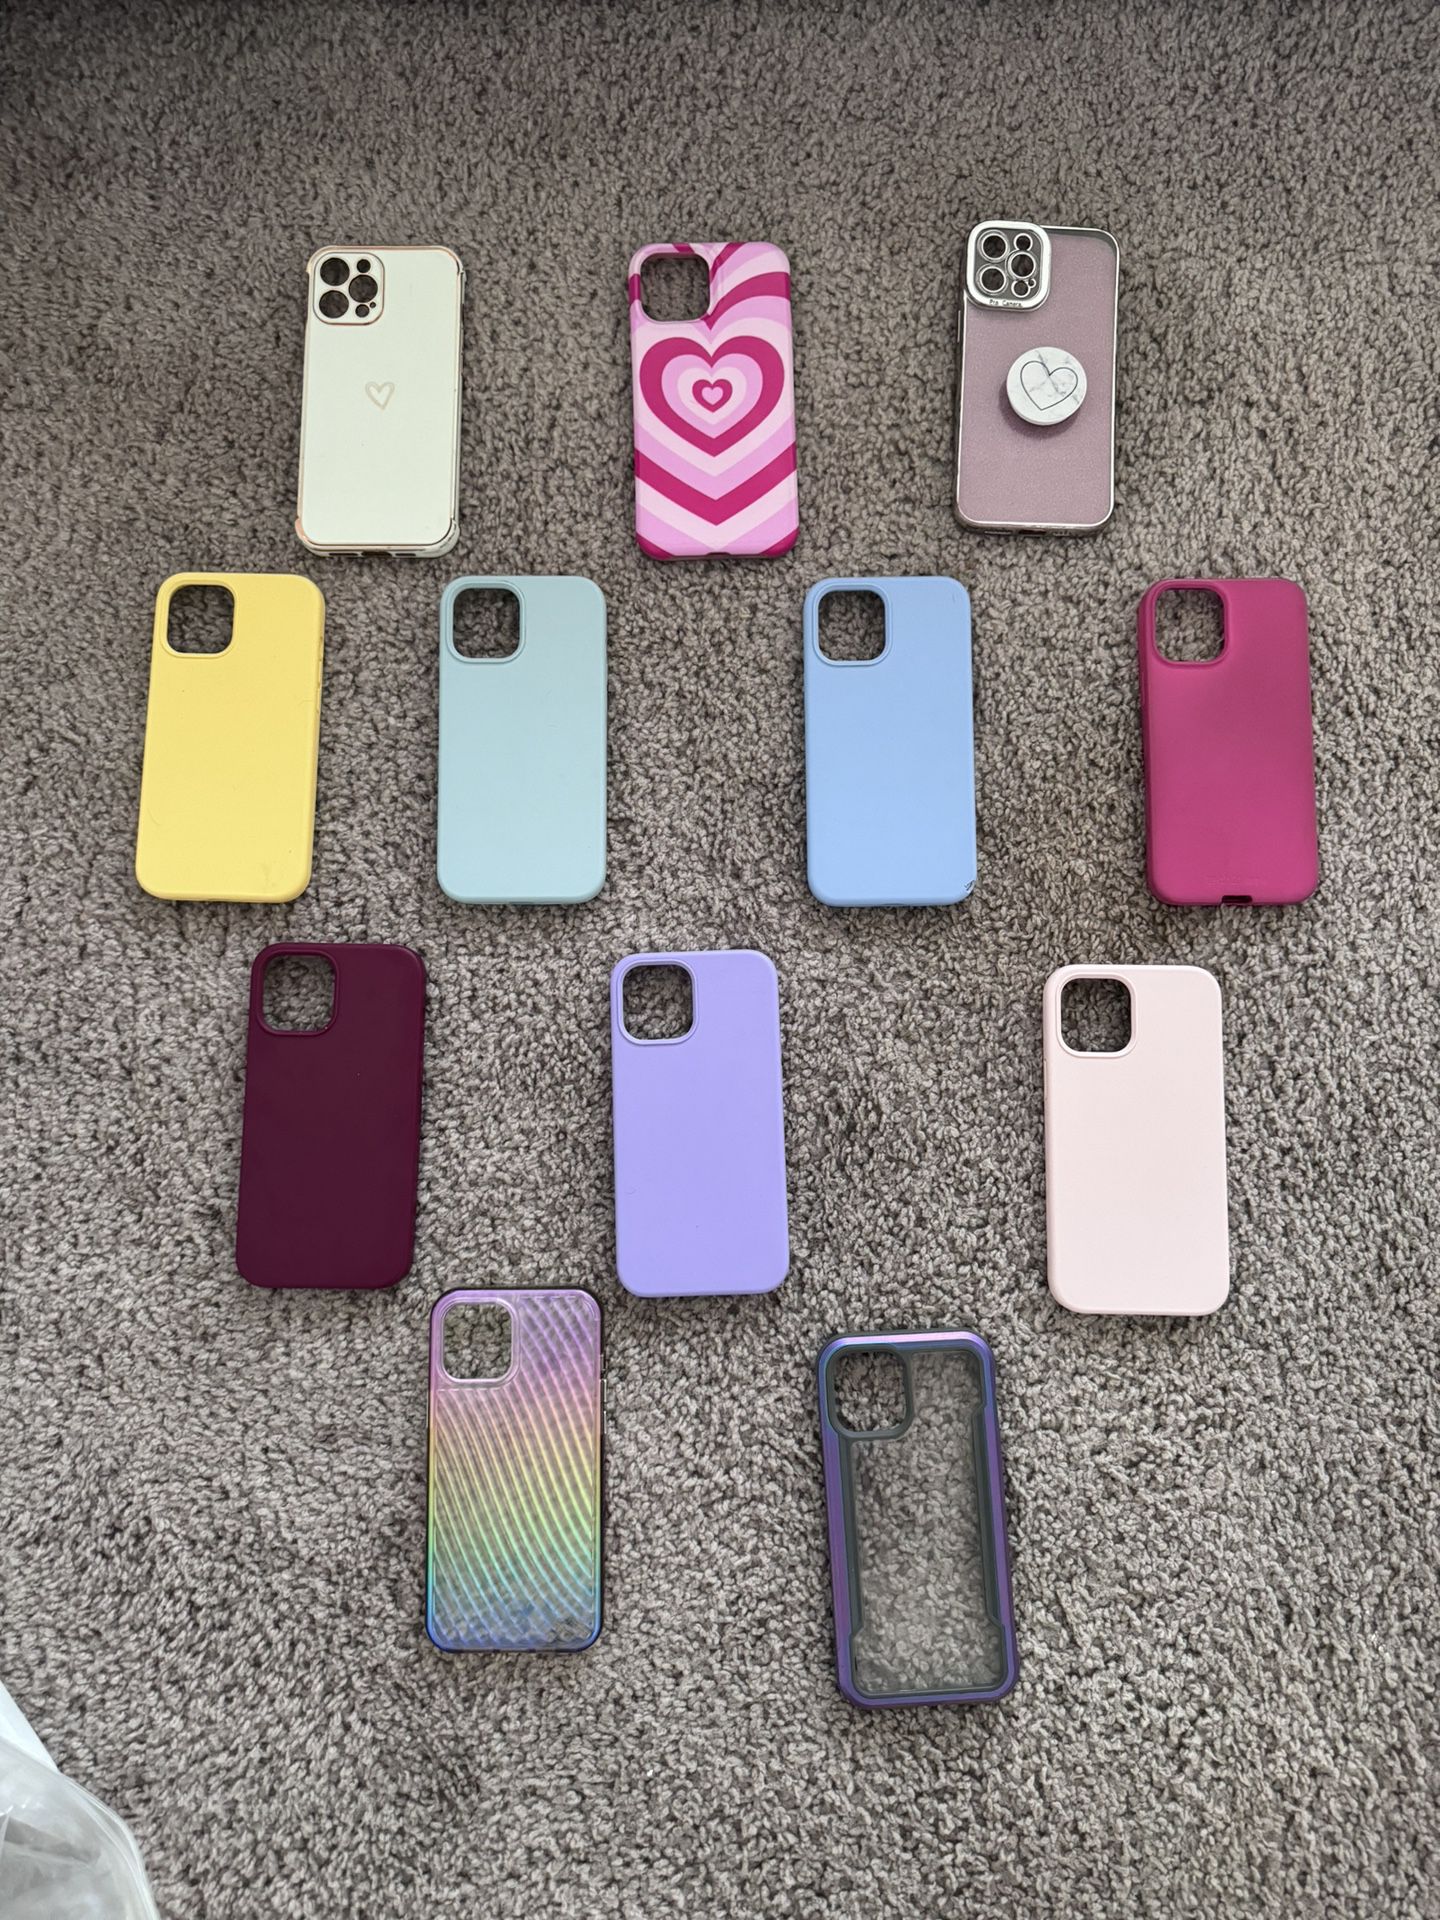 iPhone 12 Max Pro Cases $5 Each 